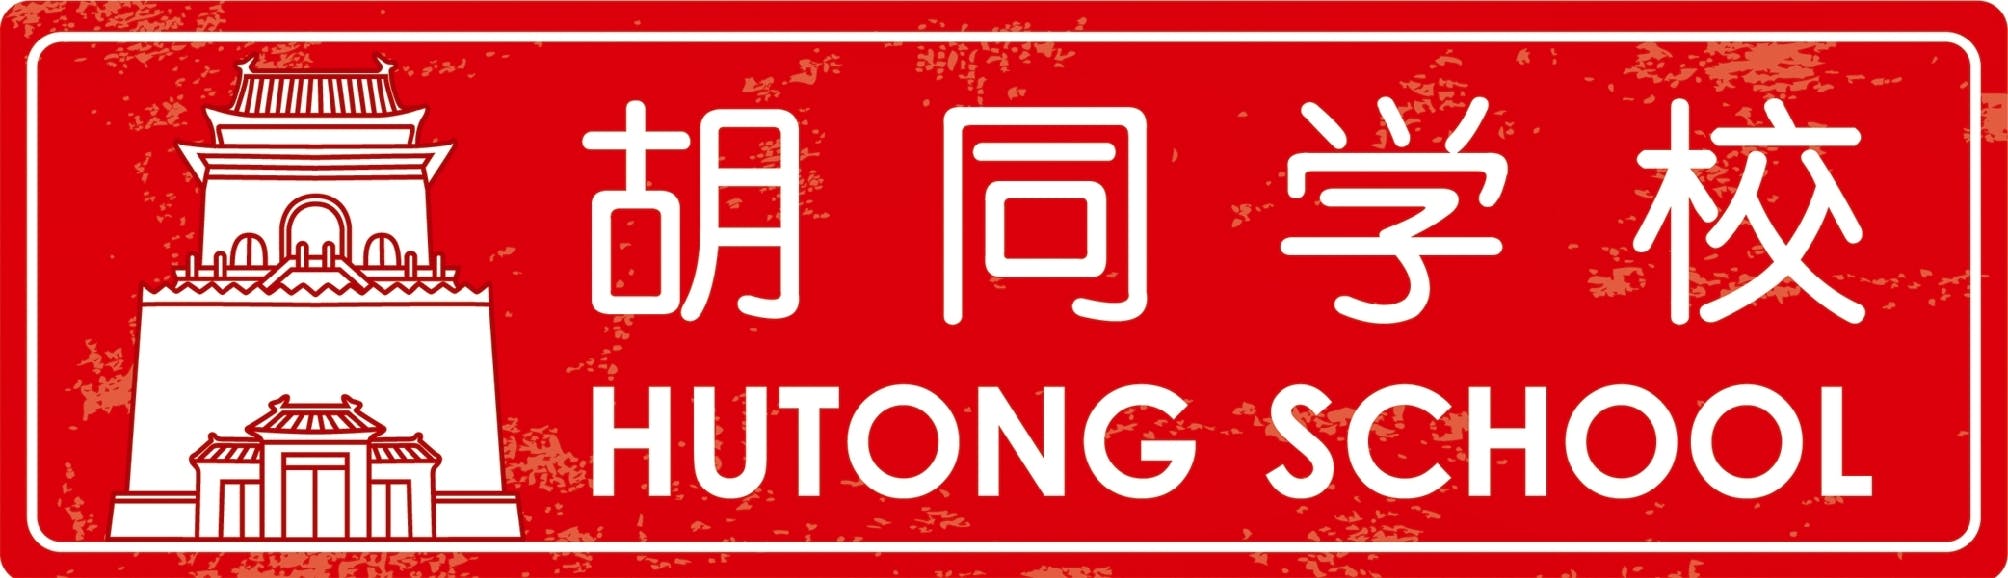 Register for Hutong School Chinese Classes